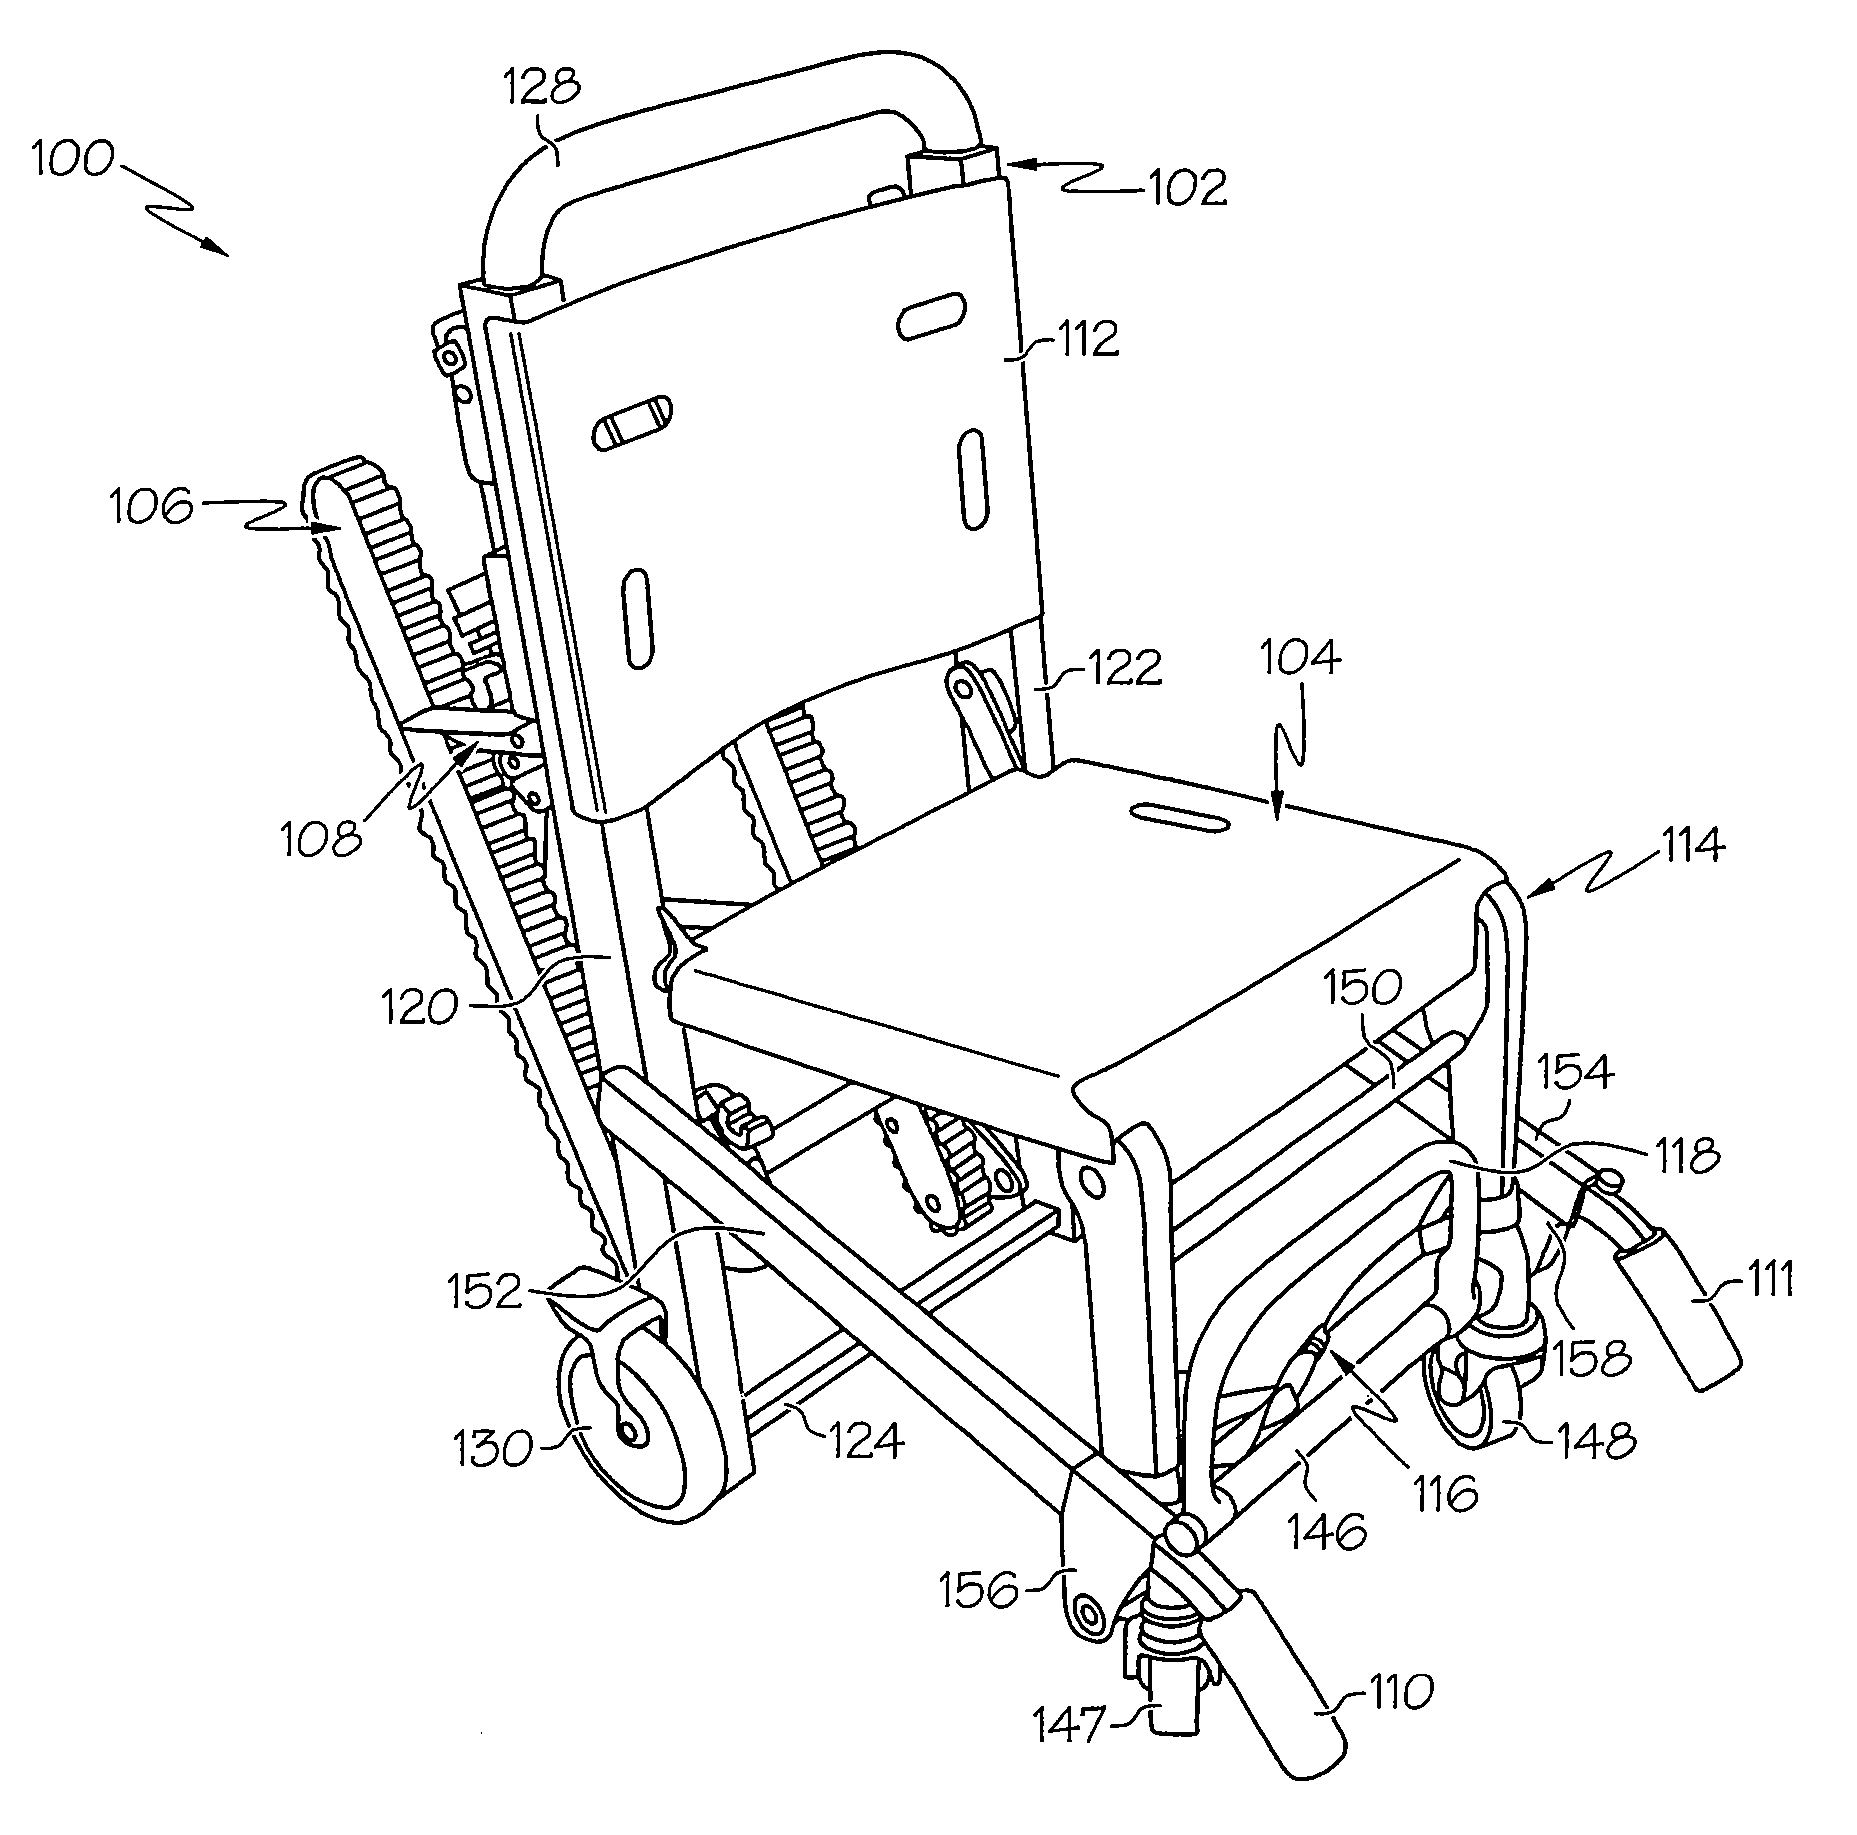 Stair chair with an adjustable glide track resistance and braking device